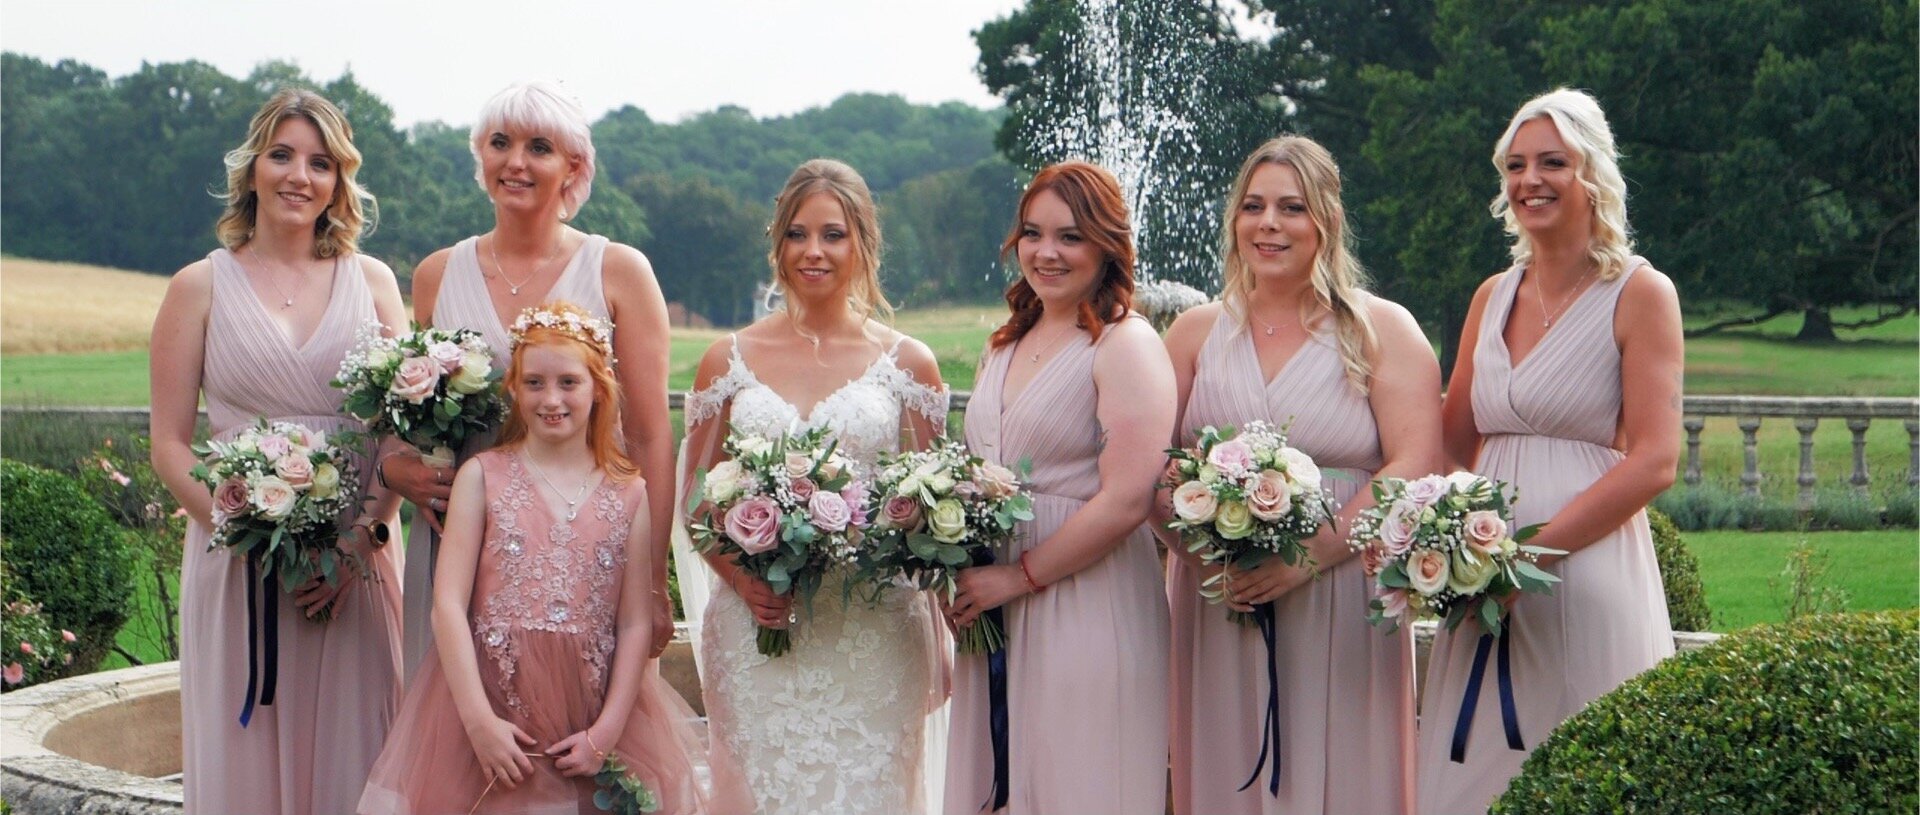 Bride and bridesmaids at quendon hall essex.jpg